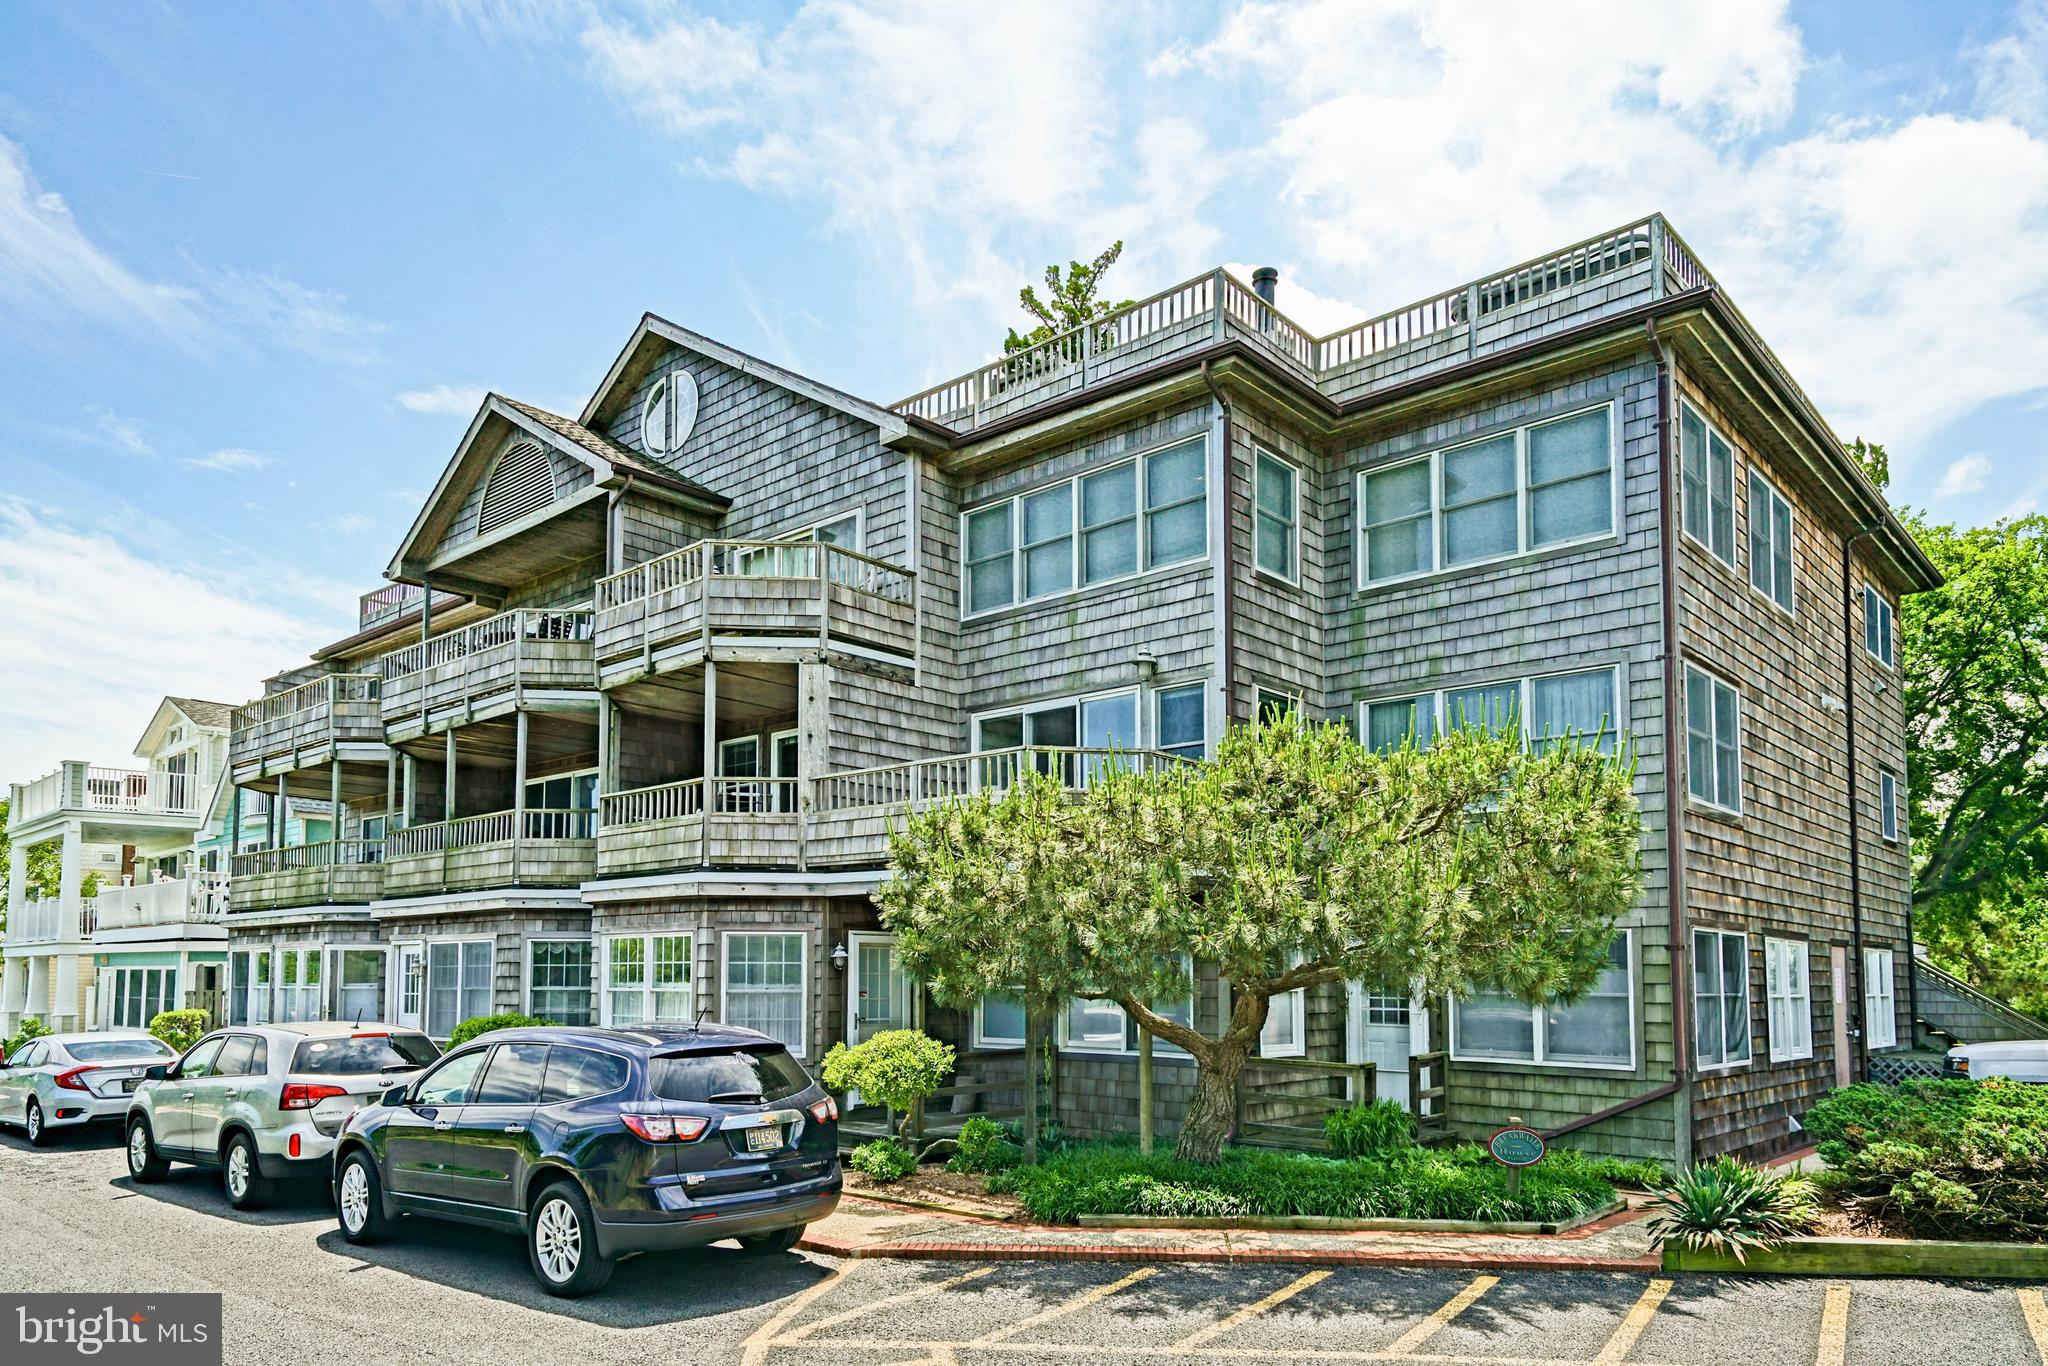 ONE OF A KIND ON THE BEACH - Take a front-row seat to panoramic sunsets, sea breezes, beach dunes and the Delaware Bay from the sheltered deck of this airy multi-level condo. Walk to Historic Lewes shops and restaurants and bike to the Cape Henlopen State Park, Junction & Breakwater, and Gordons Pond Bike Trails.